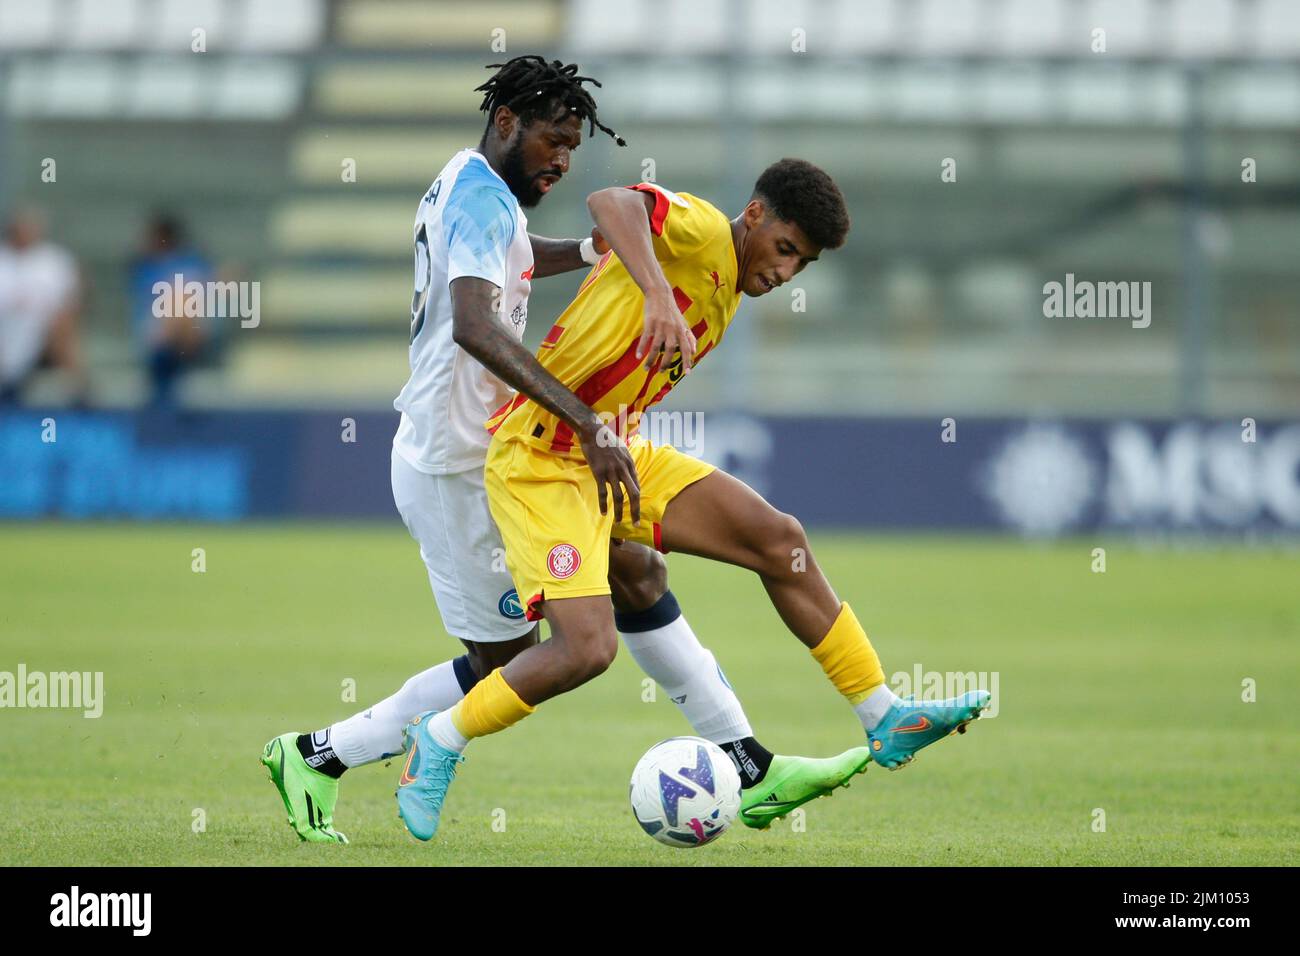 SSC Napoli's Cameroonian striker Andre Zambo Anguissa challenges for the ball with Girona's forward Oscar Urena during friendly match SSC Napoli Girona at the SSC Napoli's 2022-23 pre-season training camp in Castel di Sangro Stock Photo